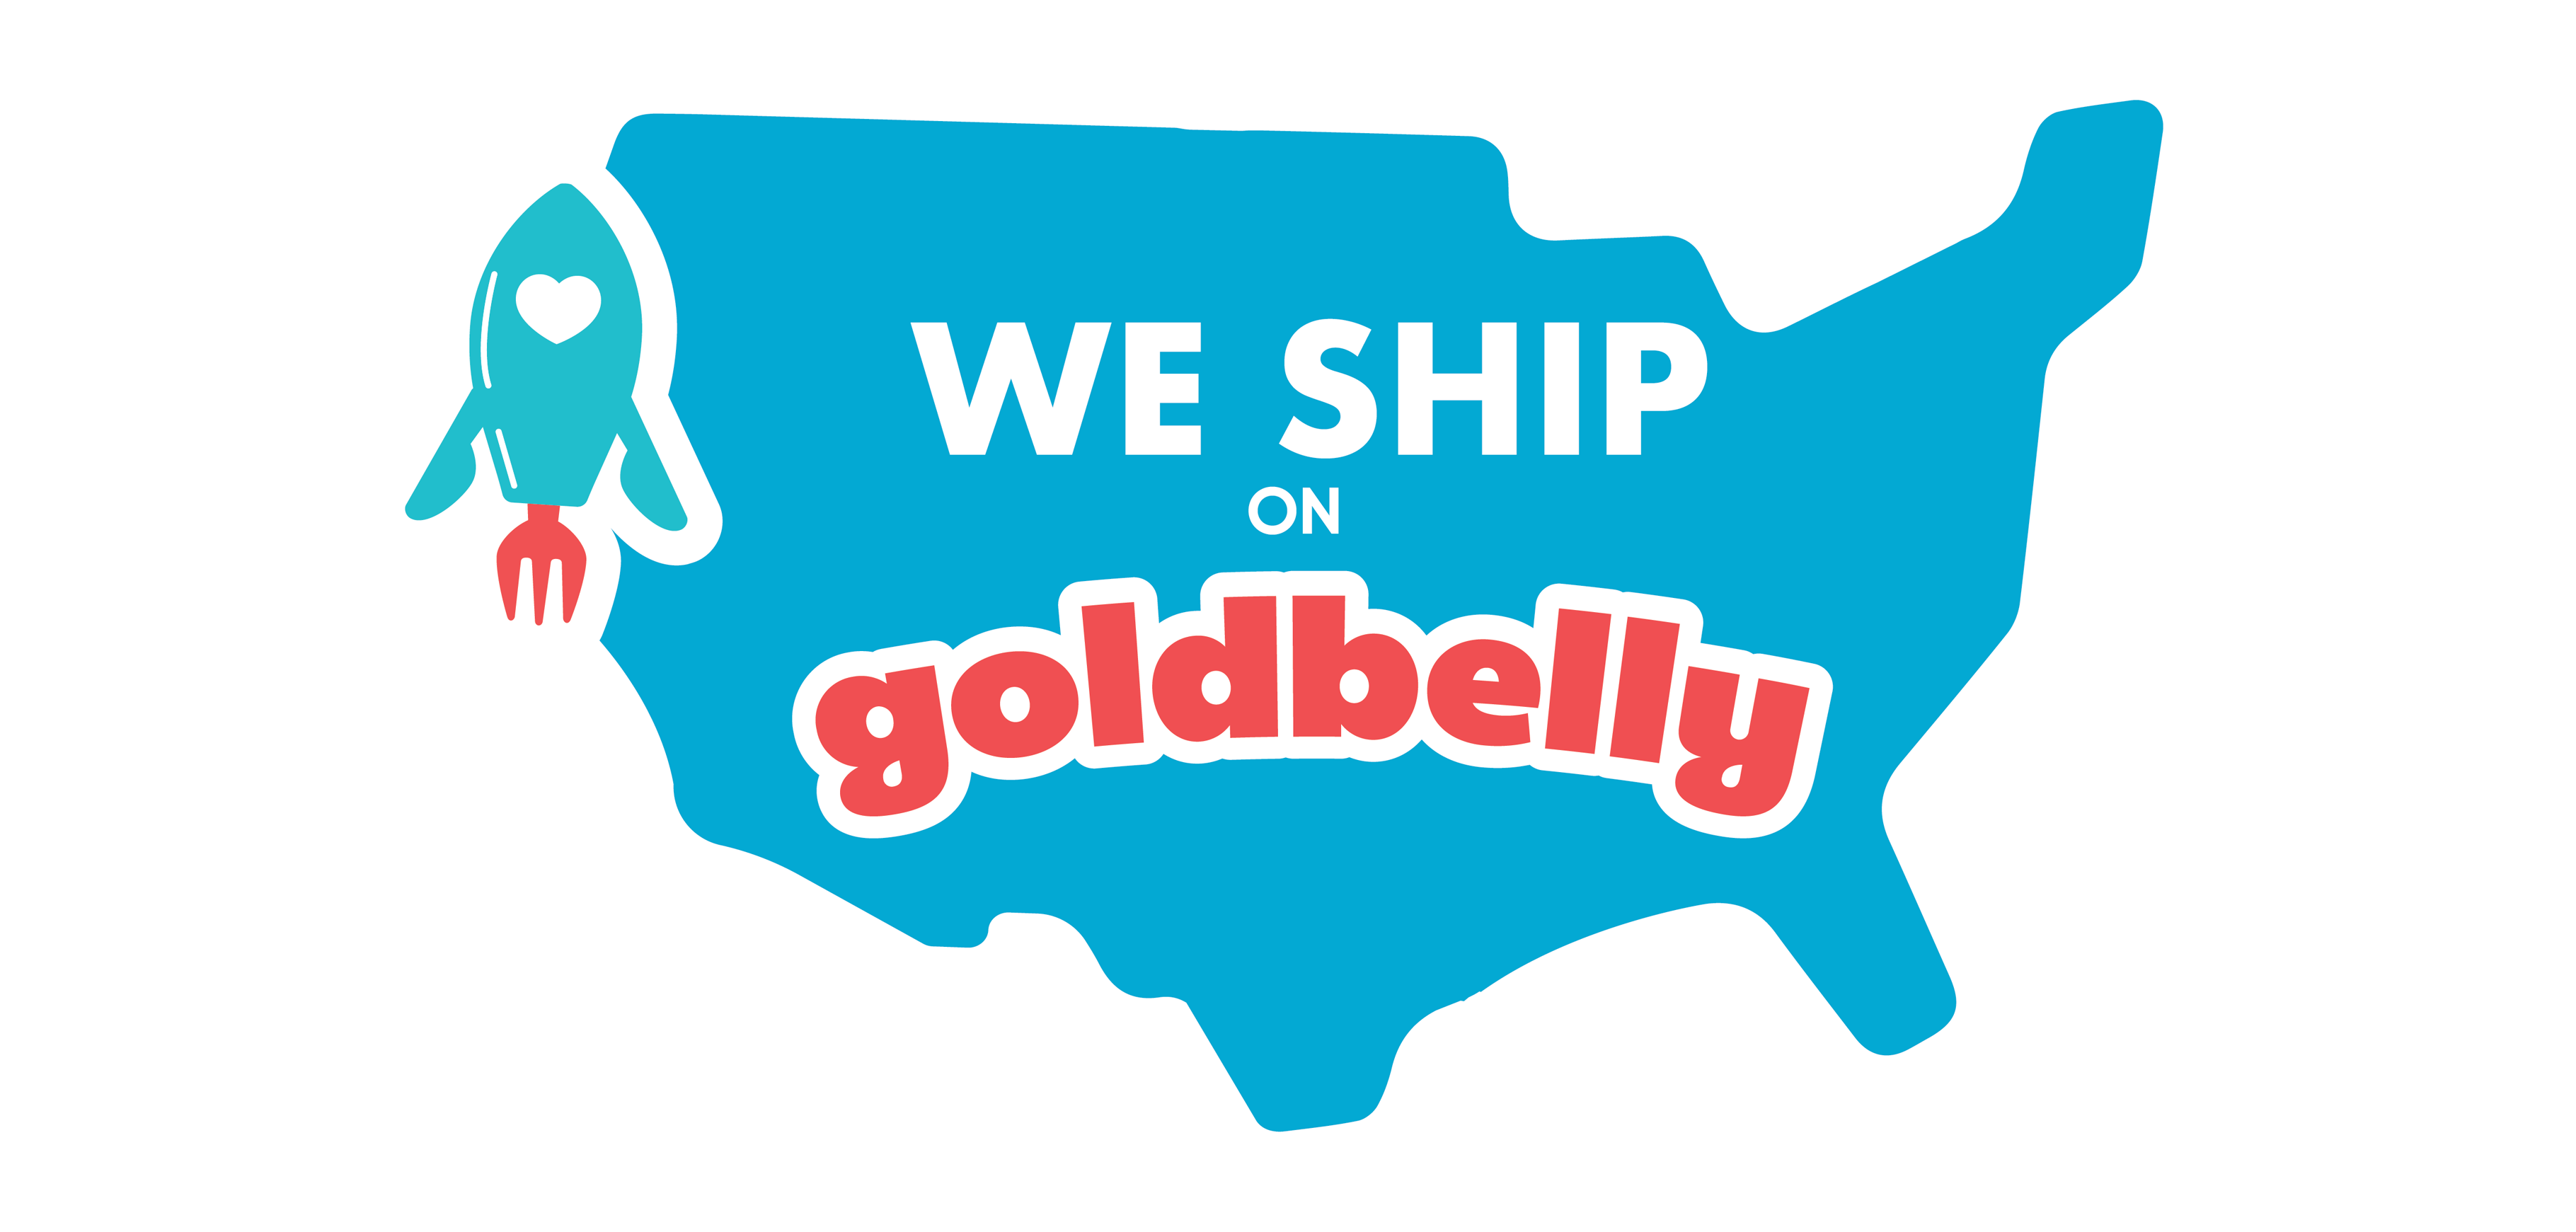 We're Now Shipping on Goldbelly!